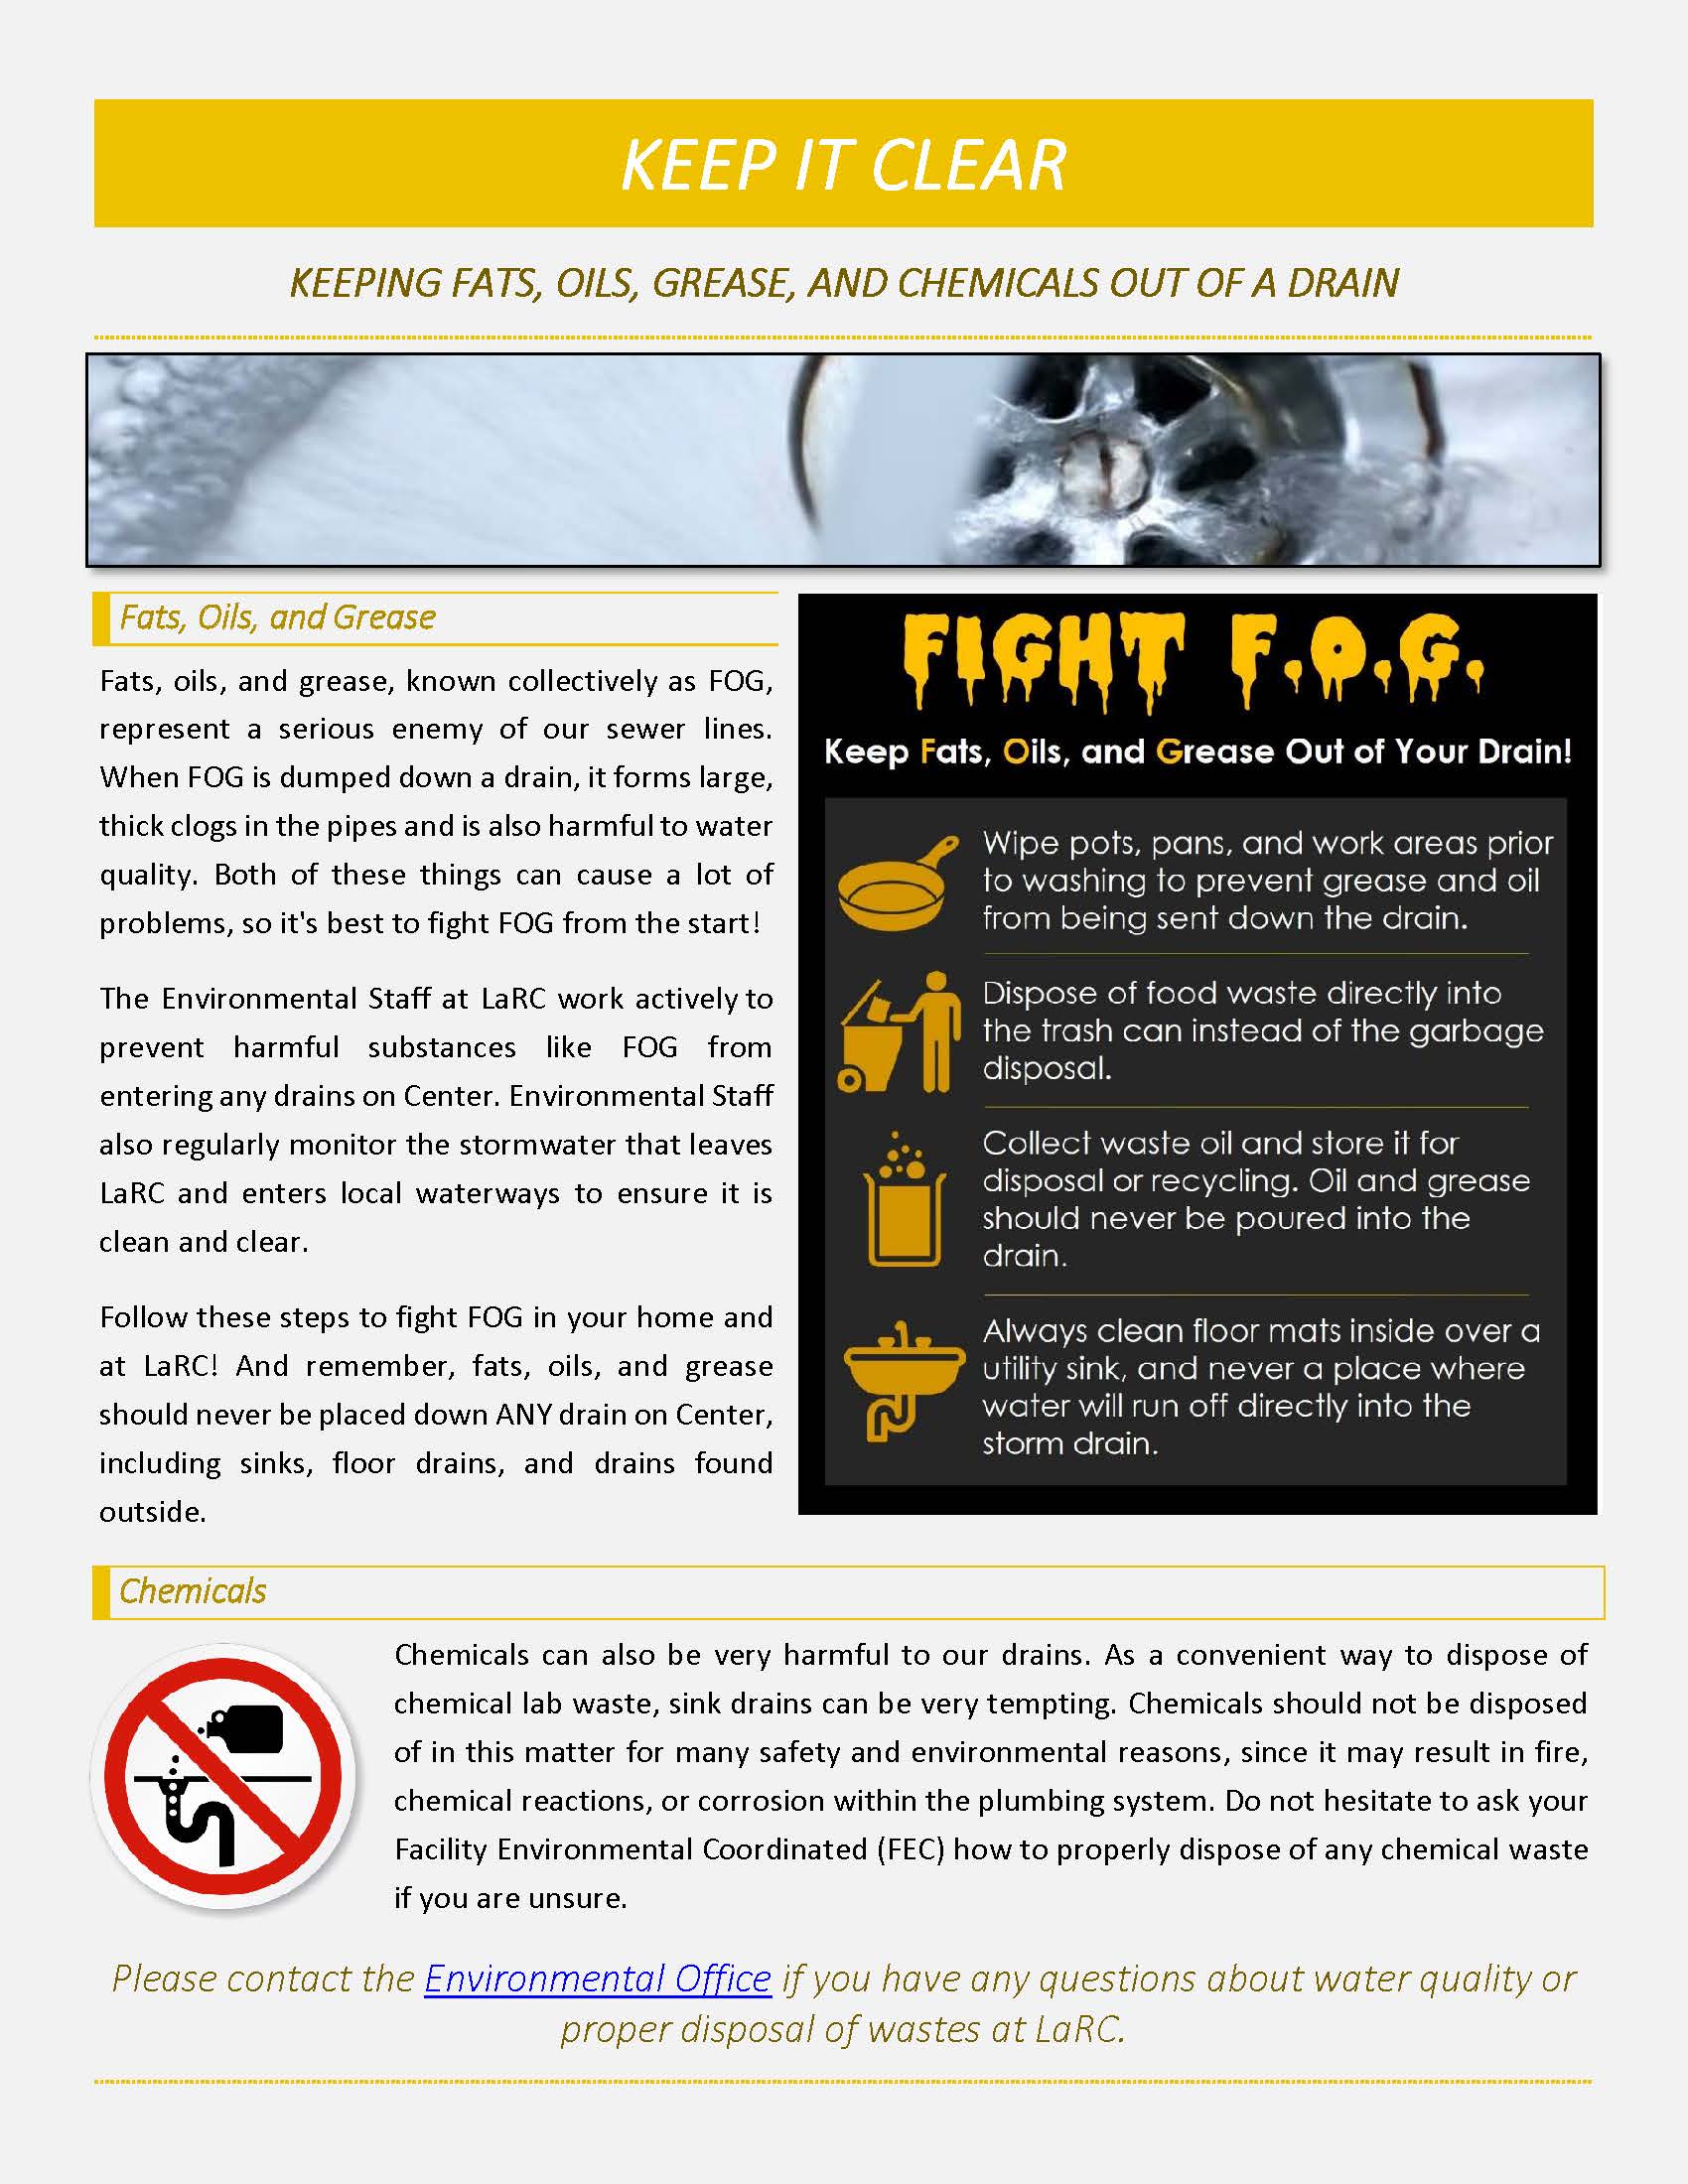 KEEP IT CLEAR tips to fight FOGC